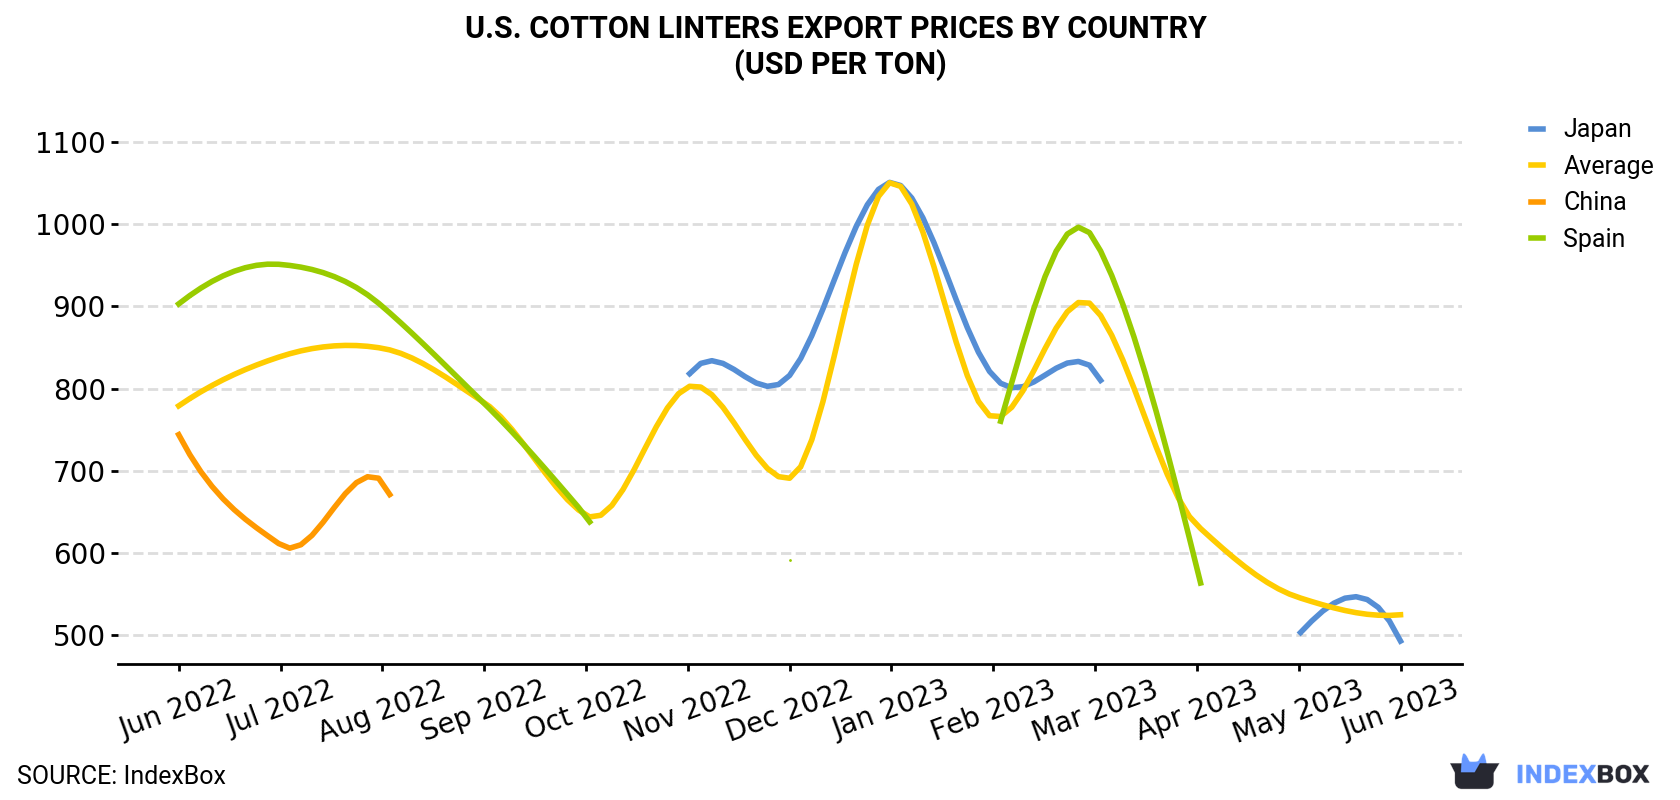 U.S. Cotton Linters Export Prices By Country (USD Per Ton)